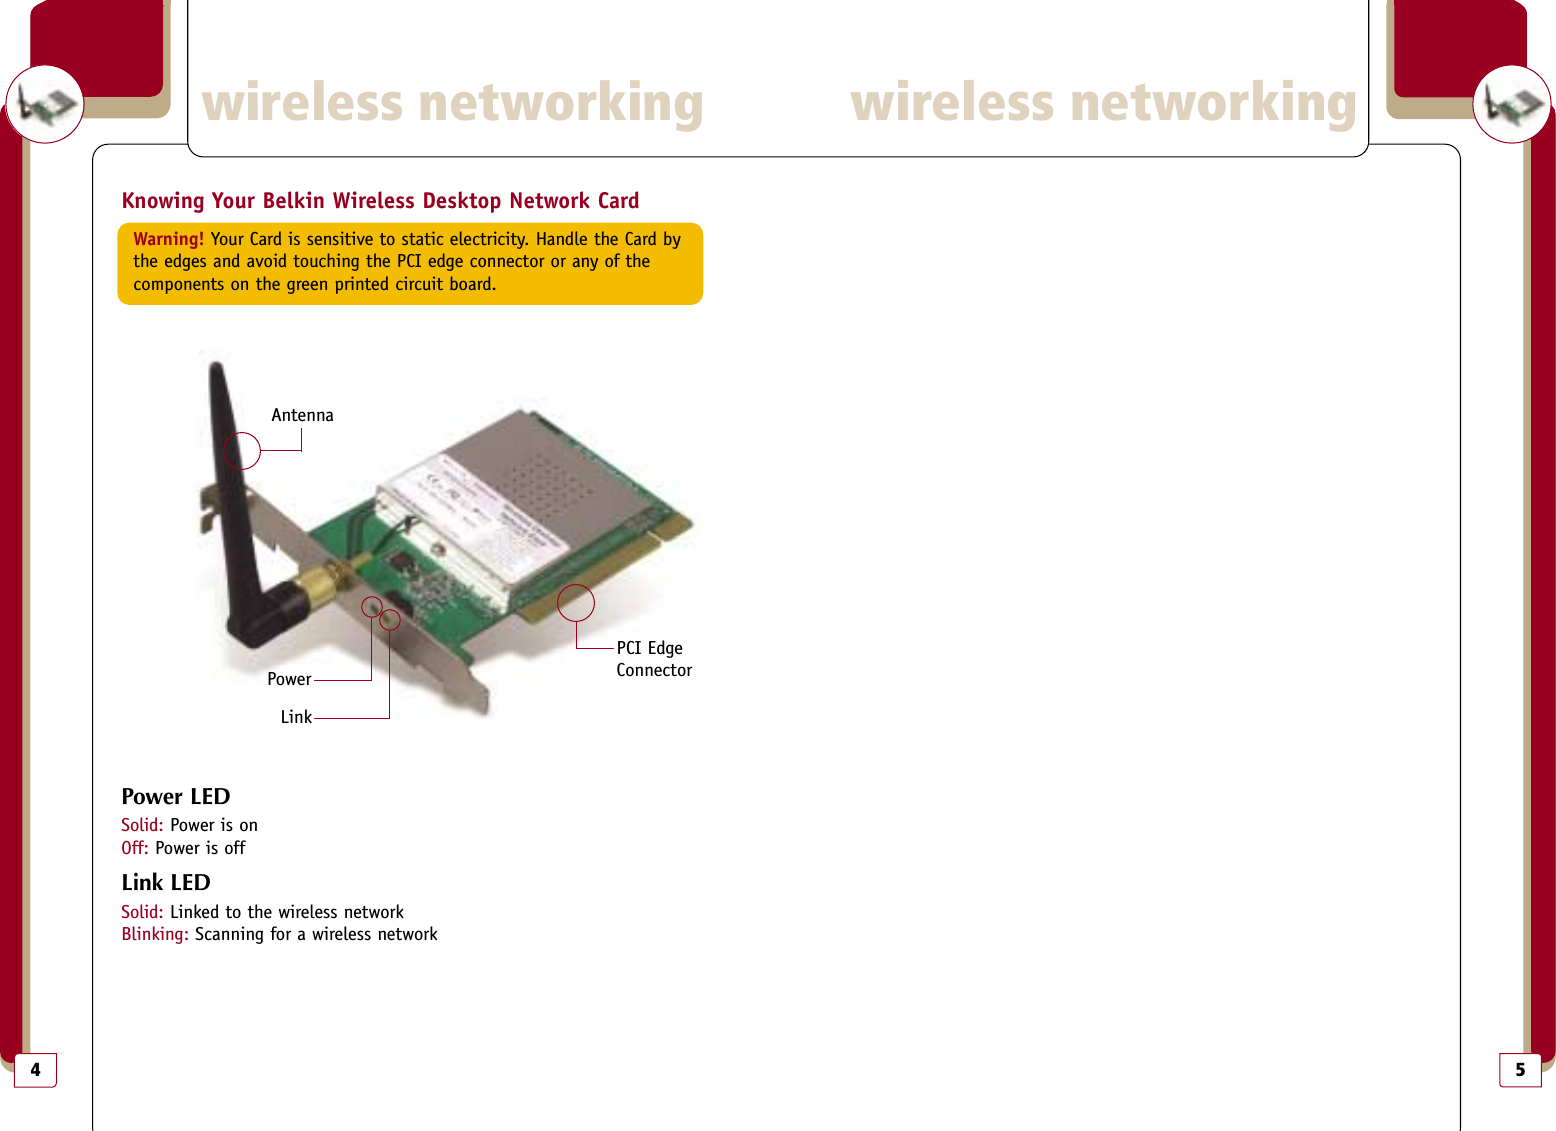 5wireless networkingwireless networking4Knowing Your Belkin Wireless Desktop Network CardWarning! Your Card is sensitive to static electricity. Handle the Card by the edges and avoid touching the PCI edge connector or any of the components on the green printed circuit board.Power LEDSolid: Power is onOff: Power is offLink LEDSolid: Linked to the wireless networkBlinking: Scanning for a wireless networkAntennaPowerLinkPCI EdgeConnector